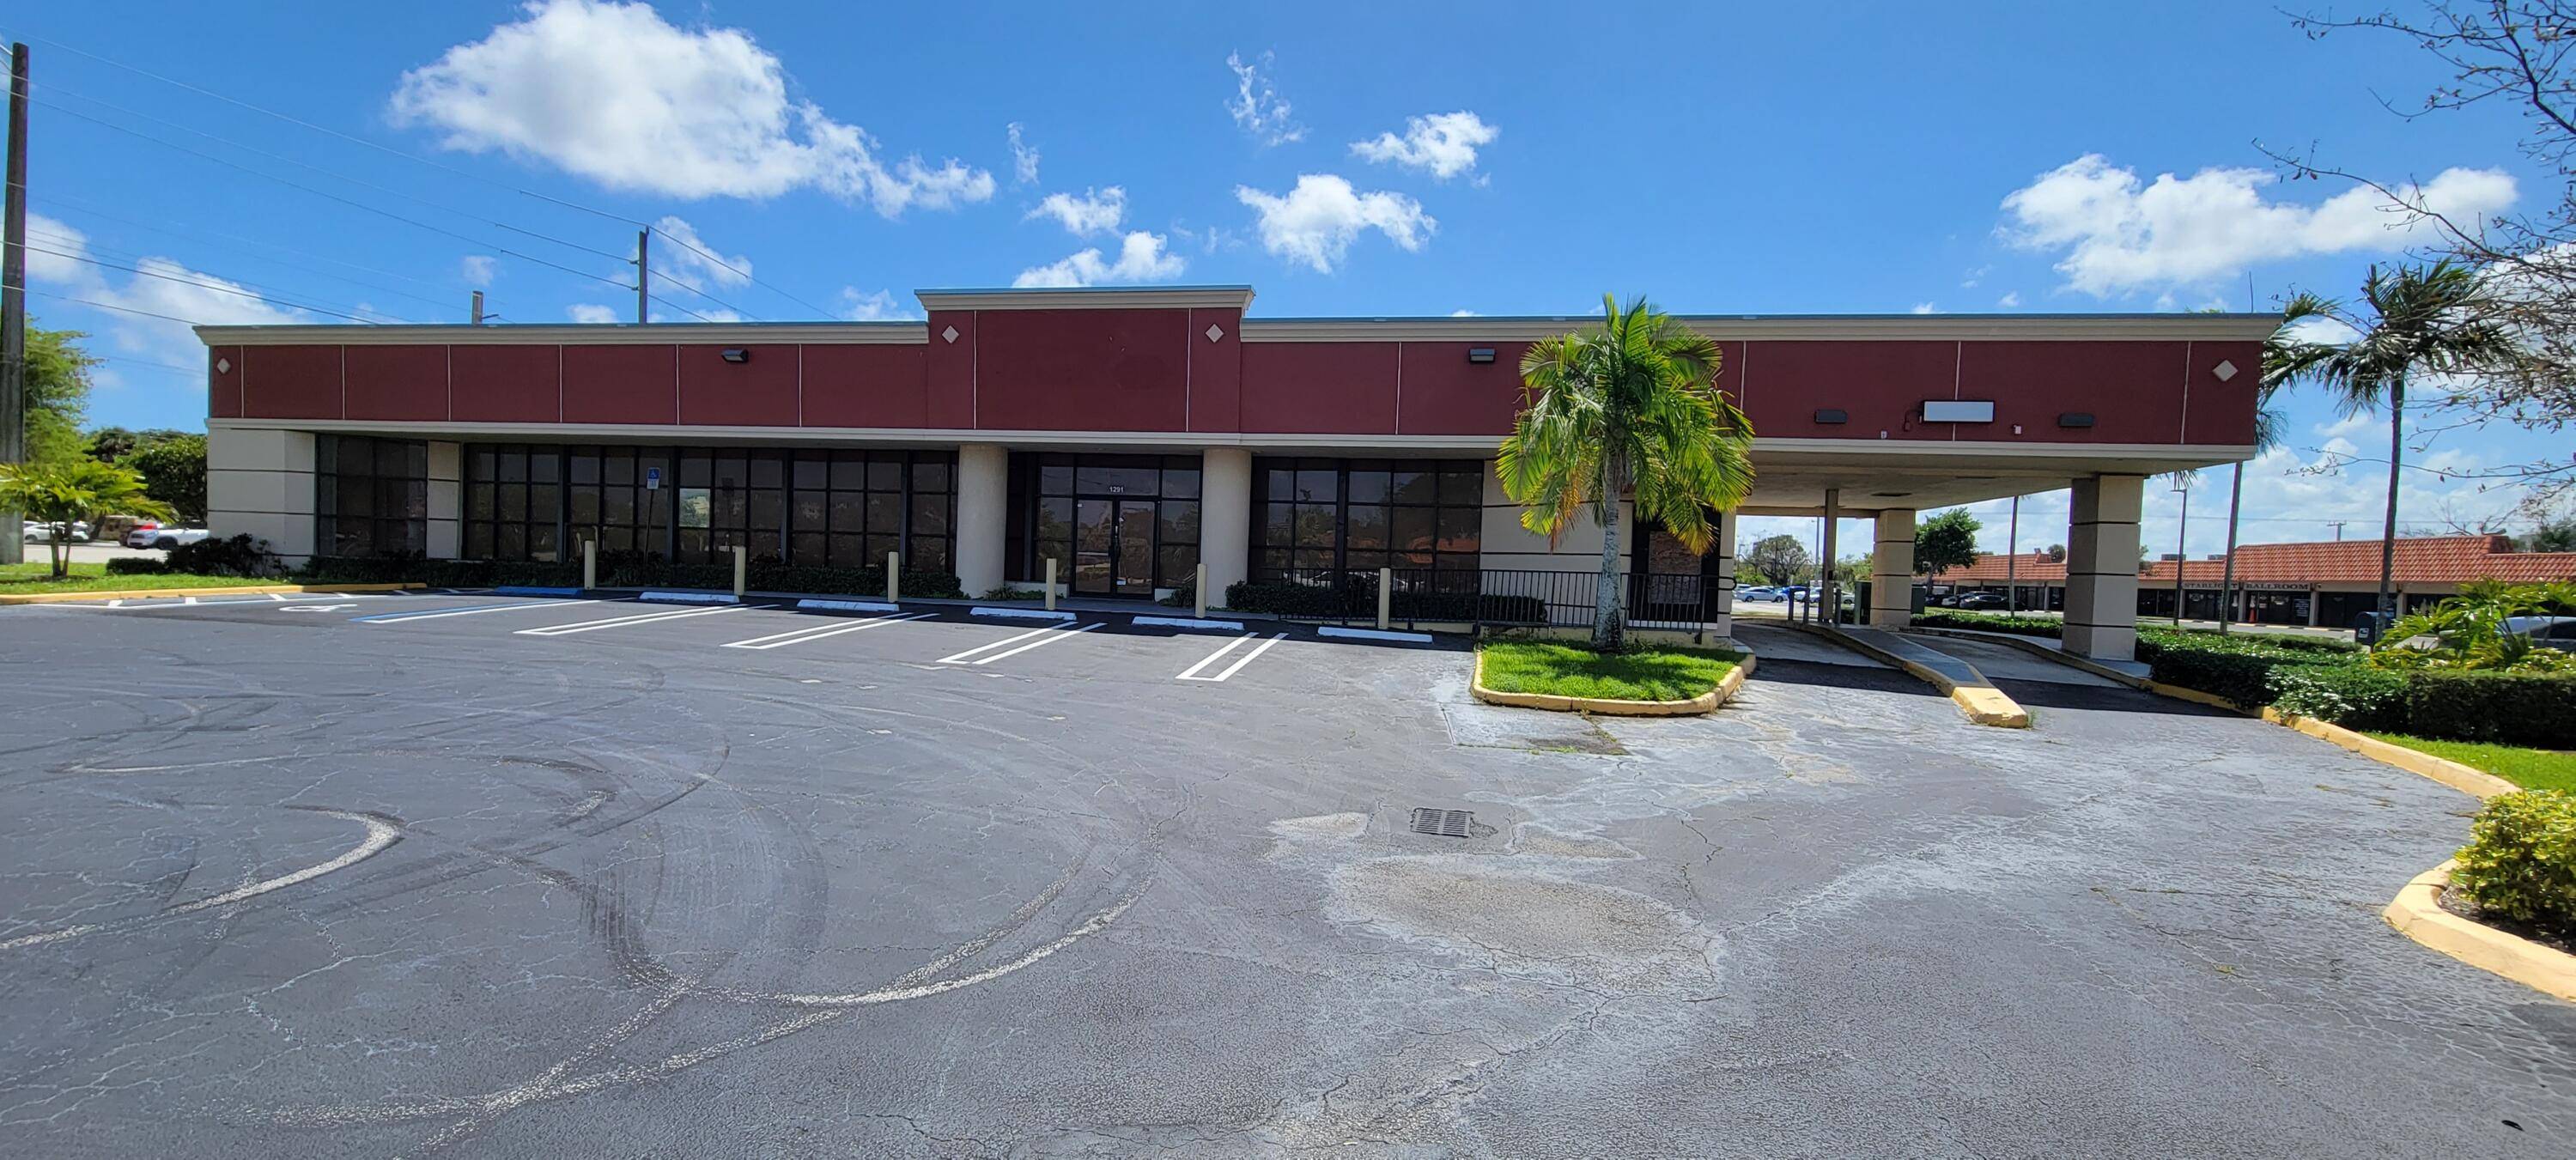 4725 sq foot Free Standing retail space in high traffic neighborhood center formerly HSBC Bank.